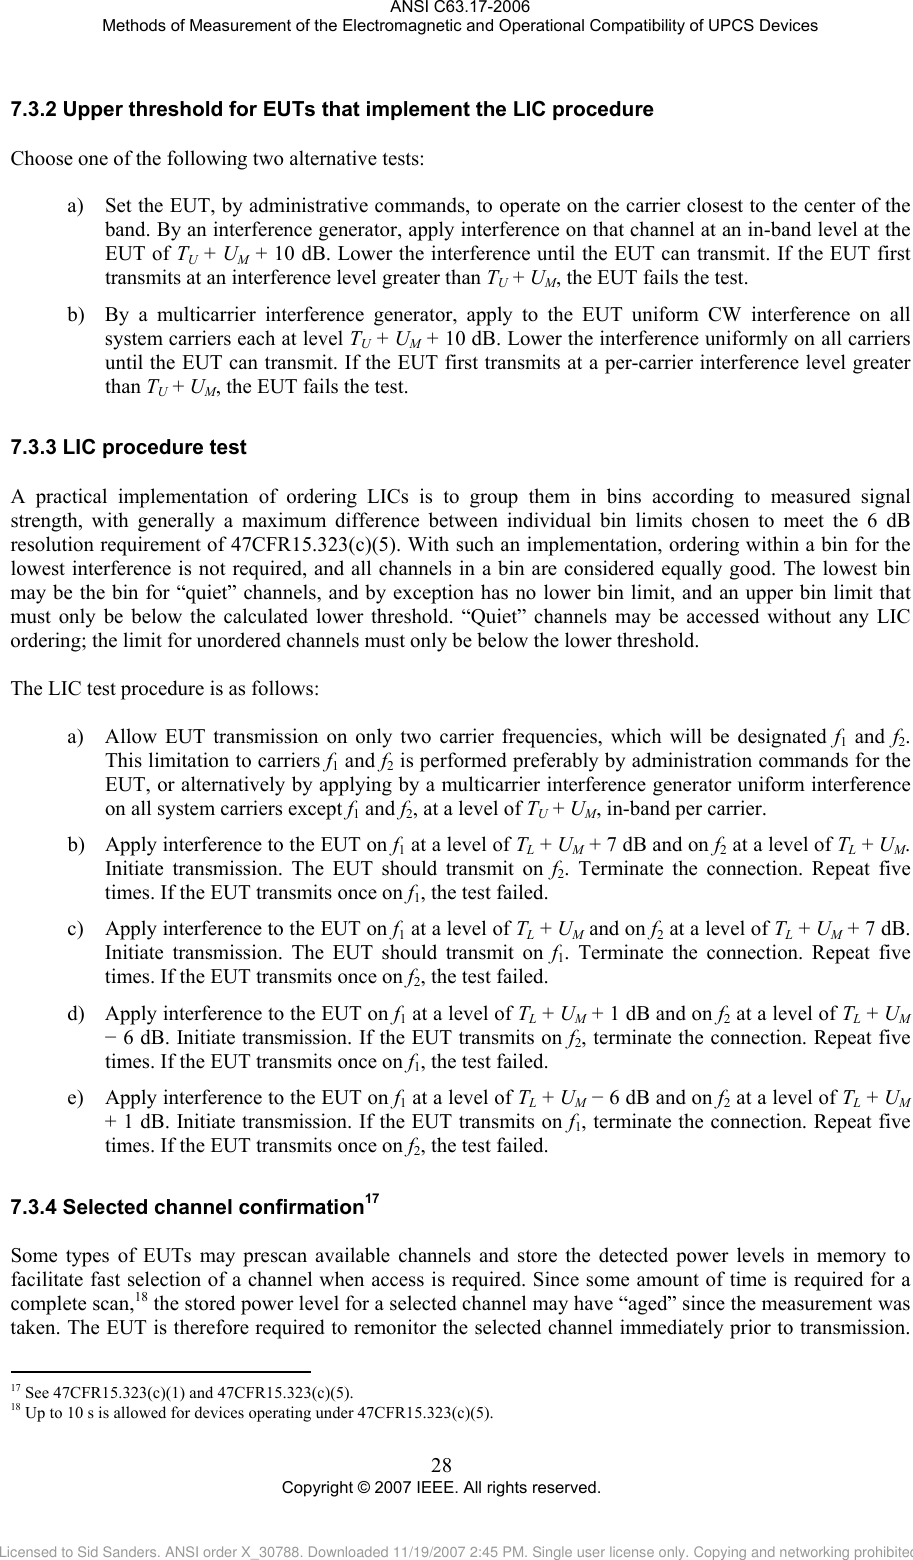 ANSI C63.17-2006 Methods of Measurement of the Electromagnetic and Operational Compatibility of UPCS Devices 7.3.27.3.37.3.4                                                 Upper threshold for EUTs that implement the LIC procedure Choose one of the following two alternative tests:  a) Set the EUT, by administrative commands, to operate on the carrier closest to the center of the band. By an interference generator, apply interference on that channel at an in-band level at the EUT of TU + UM + 10 dB. Lower the interference until the EUT can transmit. If the EUT first transmits at an interference level greater than TU + UM, the EUT fails the test. b) By a multicarrier interference generator, apply to the EUT uniform CW interference on all system carriers each at level TU + UM + 10 dB. Lower the interference uniformly on all carriers until the EUT can transmit. If the EUT first transmits at a per-carrier interference level greater than TU + UM, the EUT fails the test.  LIC procedure test A practical implementation of ordering LICs is to group them in bins according to measured signal strength, with generally a maximum difference between individual bin limits chosen to meet the 6 dB resolution requirement of 47CFR15.323(c)(5). With such an implementation, ordering within a bin for the lowest interference is not required, and all channels in a bin are considered equally good. The lowest bin may be the bin for “quiet” channels, and by exception has no lower bin limit, and an upper bin limit that must only be below the calculated lower threshold. “Quiet” channels may be accessed without any LIC ordering; the limit for unordered channels must only be below the lower threshold.  The LIC test procedure is as follows:  a) Allow EUT transmission on only two carrier frequencies, which will be designated f1 and f2. This limitation to carriers f1 and f2 is performed preferably by administration commands for the EUT, or alternatively by applying by a multicarrier interference generator uniform interference on all system carriers except f1 and f2, at a level of TU + UM, in-band per carrier. b) Apply interference to the EUT on f1 at a level of TL + UM + 7 dB and on f2 at a level of TL + UM. Initiate transmission. The EUT should transmit on f2. Terminate the connection. Repeat five times. If the EUT transmits once on f1, the test failed.  c) Apply interference to the EUT on f1 at a level of TL + UM and on f2 at a level of TL + UM + 7 dB. Initiate transmission. The EUT should transmit on f1. Terminate the connection. Repeat five times. If the EUT transmits once on f2, the test failed.  d) Apply interference to the EUT on f1 at a level of TL + UM + 1 dB and on f2 at a level of TL + UM − 6 dB. Initiate transmission. If the EUT transmits on f2, terminate the connection. Repeat five times. If the EUT transmits once on f1, the test failed. e) Apply interference to the EUT on f1 at a level of TL + UM − 6 dB and on f2 at a level of TL + UM + 1 dB. Initiate transmission. If the EUT transmits on f1, terminate the connection. Repeat five times. If the EUT transmits once on f2, the test failed.   Selected channel confirmation17  Some types of EUTs may prescan available channels and store the detected power levels in memory to facilitate fast selection of a channel when access is required. Since some amount of time is required for a complete scan,18 the stored power level for a selected channel may have “aged” since the measurement was taken. The EUT is therefore required to remonitor the selected channel immediately prior to transmission.  17 See 47CFR15.323(c)(1) and 47CFR15.323(c)(5). 18 Up to 10 s is allowed for devices operating under 47CFR15.323(c)(5). 28 Copyright © 2007 IEEE. All rights reserved. Licensed to Sid Sanders. ANSI order X_30788. Downloaded 11/19/2007 2:45 PM. Single user license only. Copying and networking prohibited.